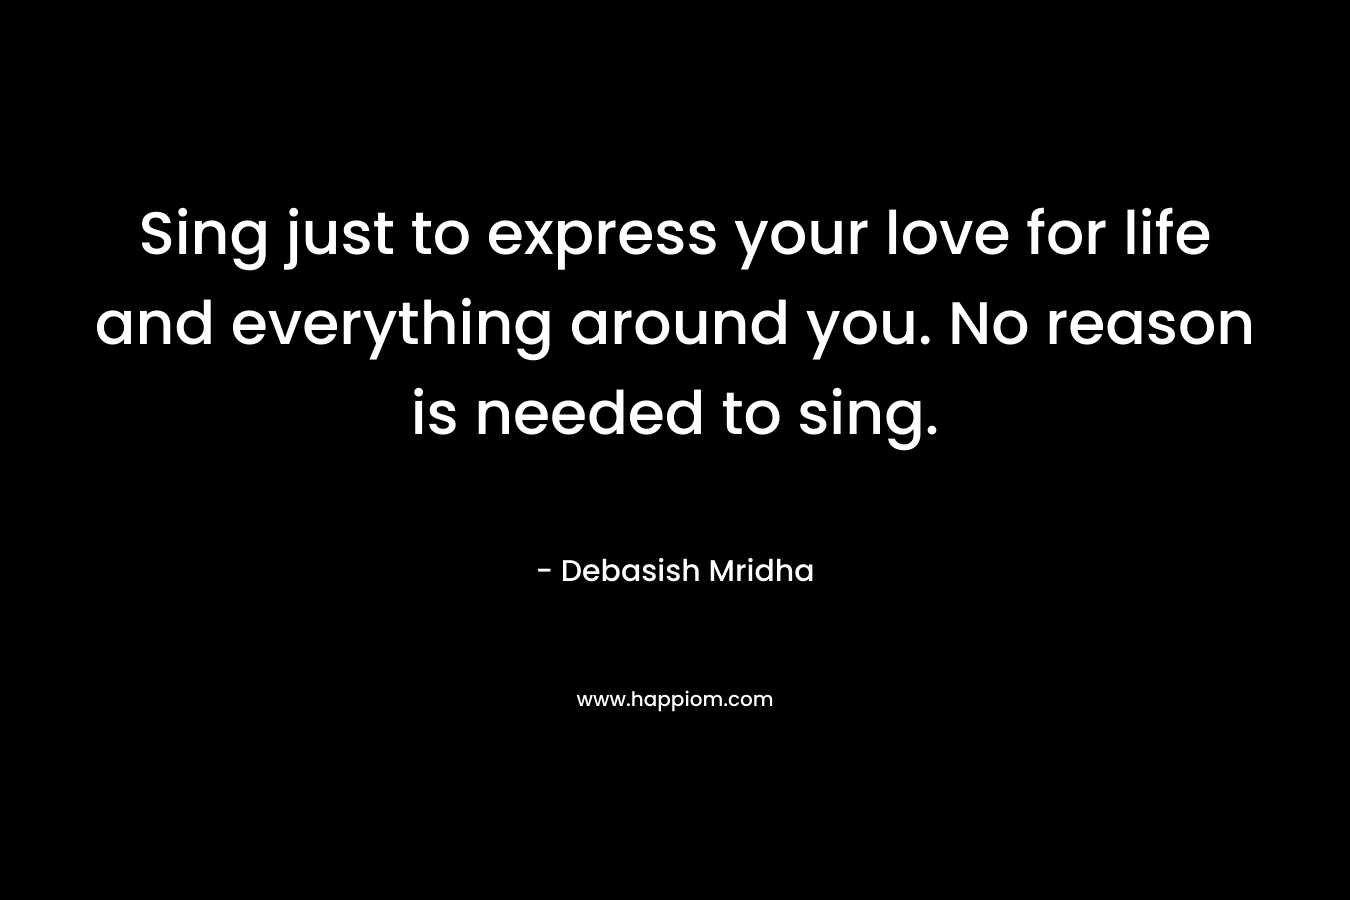 Sing just to express your love for life and everything around you. No reason is needed to sing.